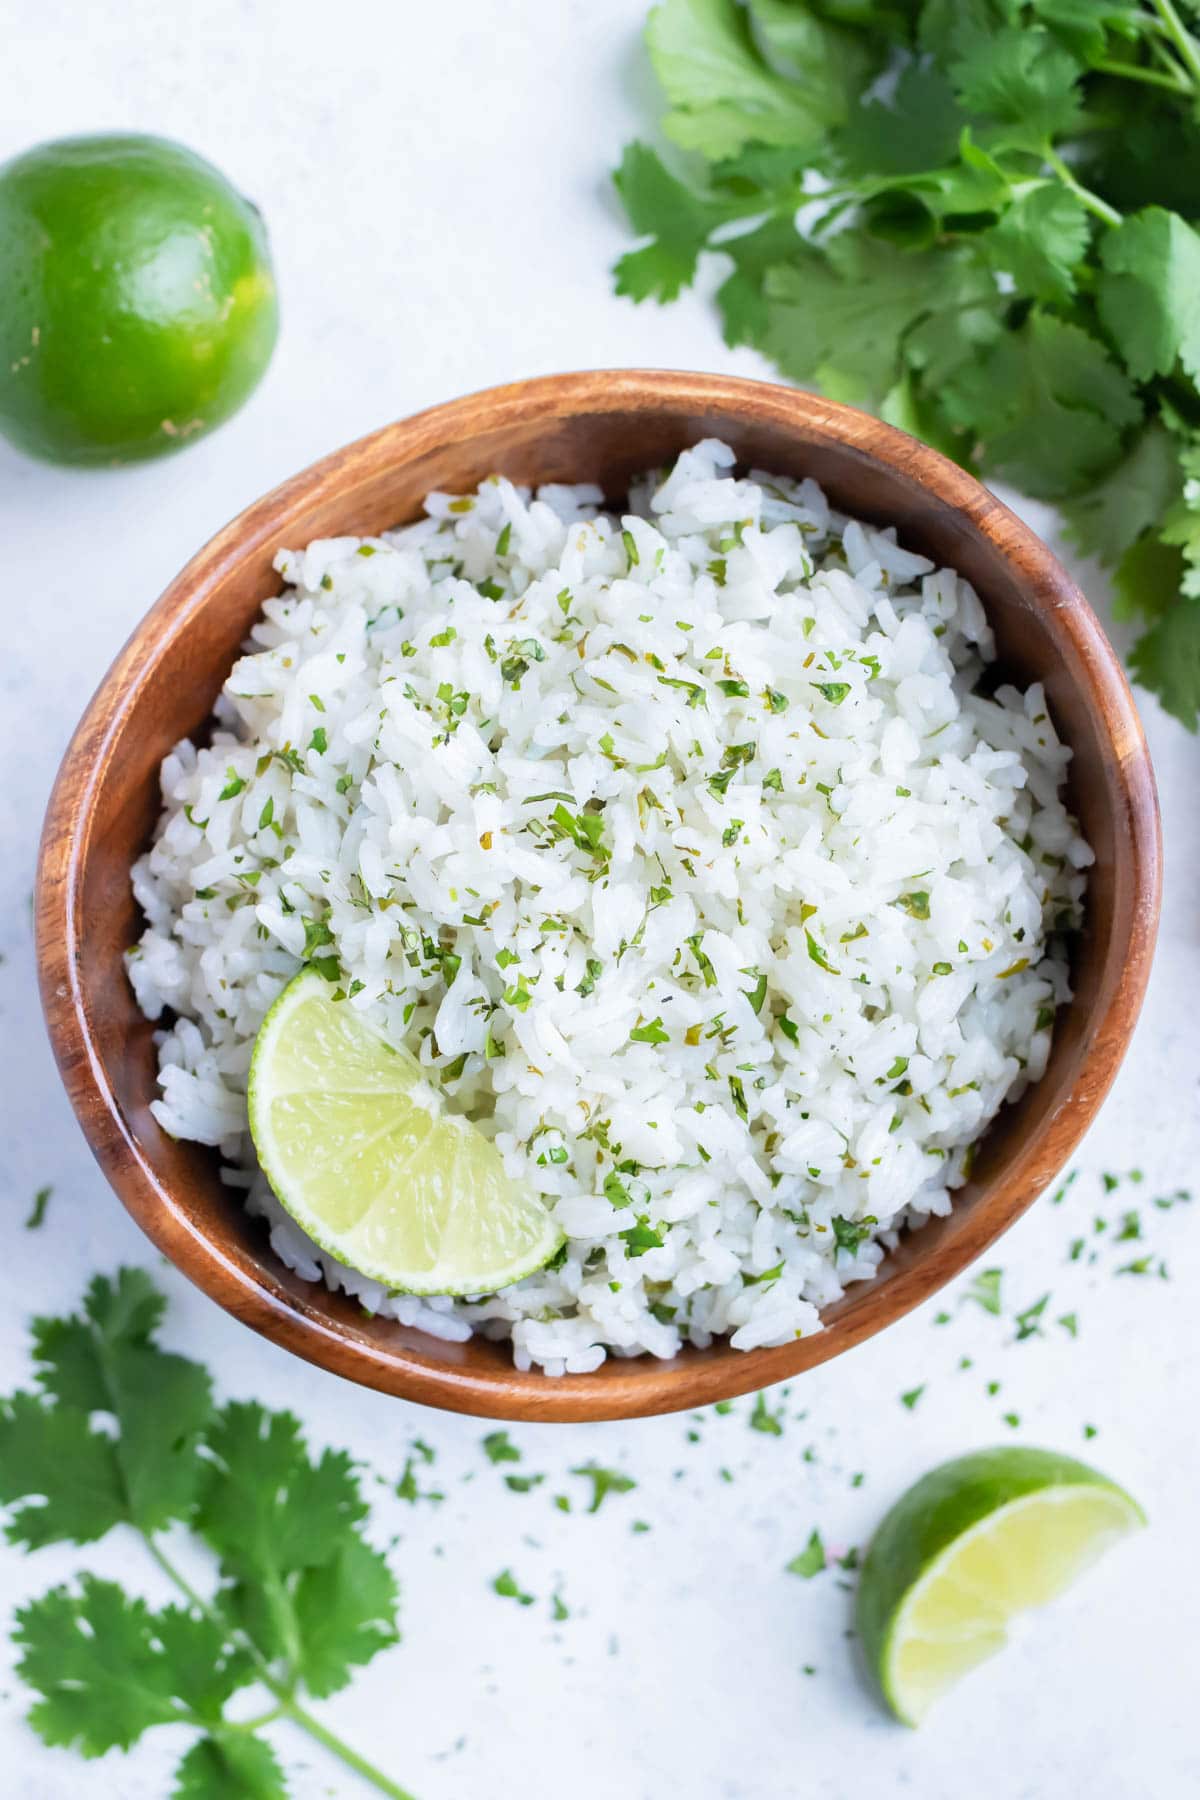 Cilantro Rice is served from a wooden bowl with fresh limes and cilantro.